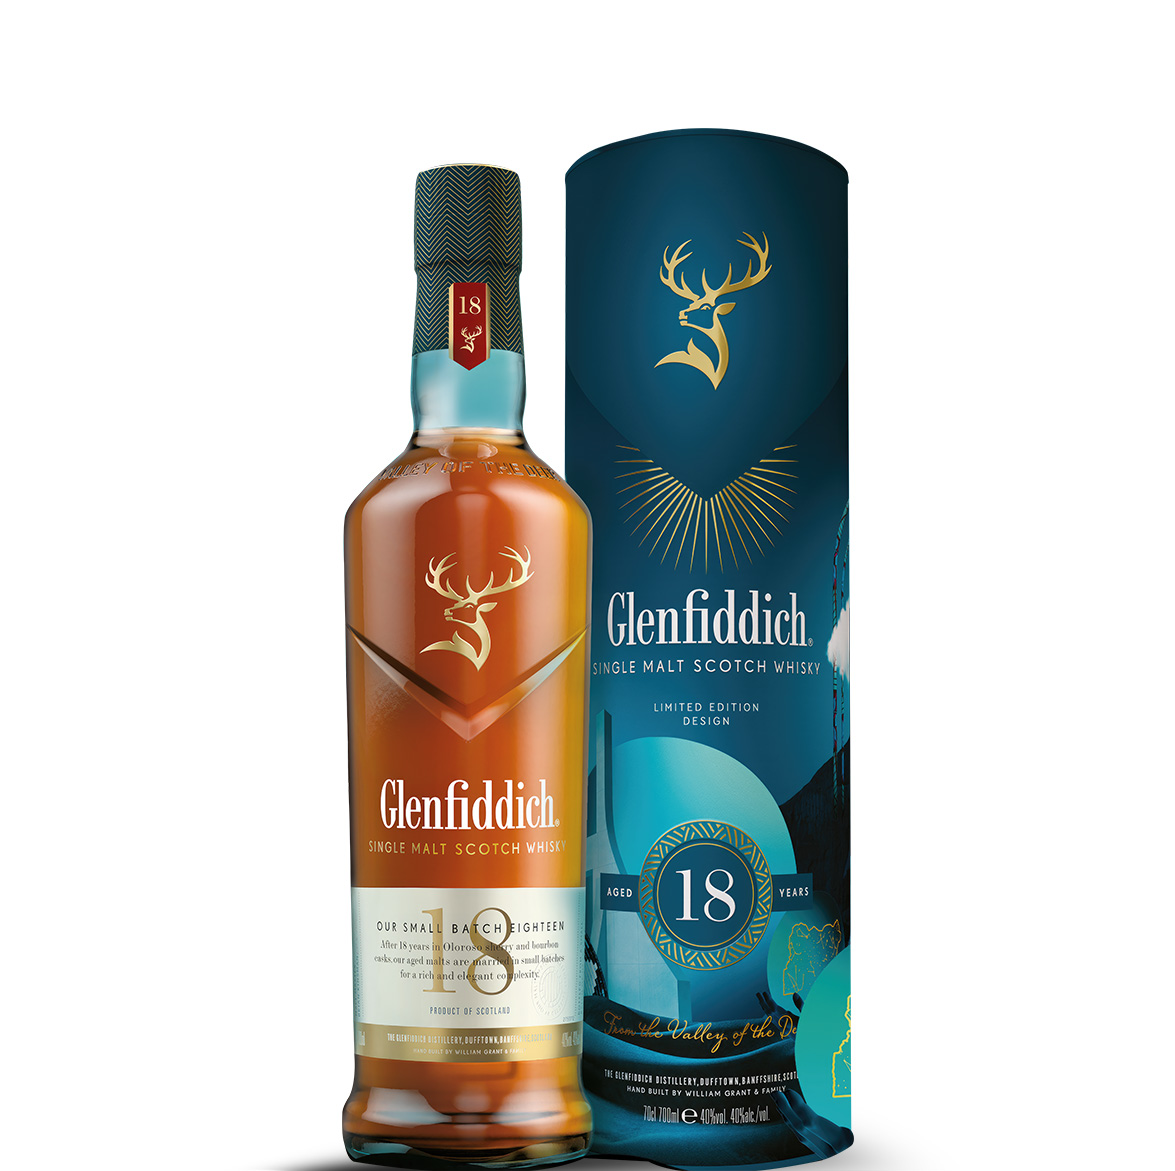 glenfiddich independence day limited edition 18 years